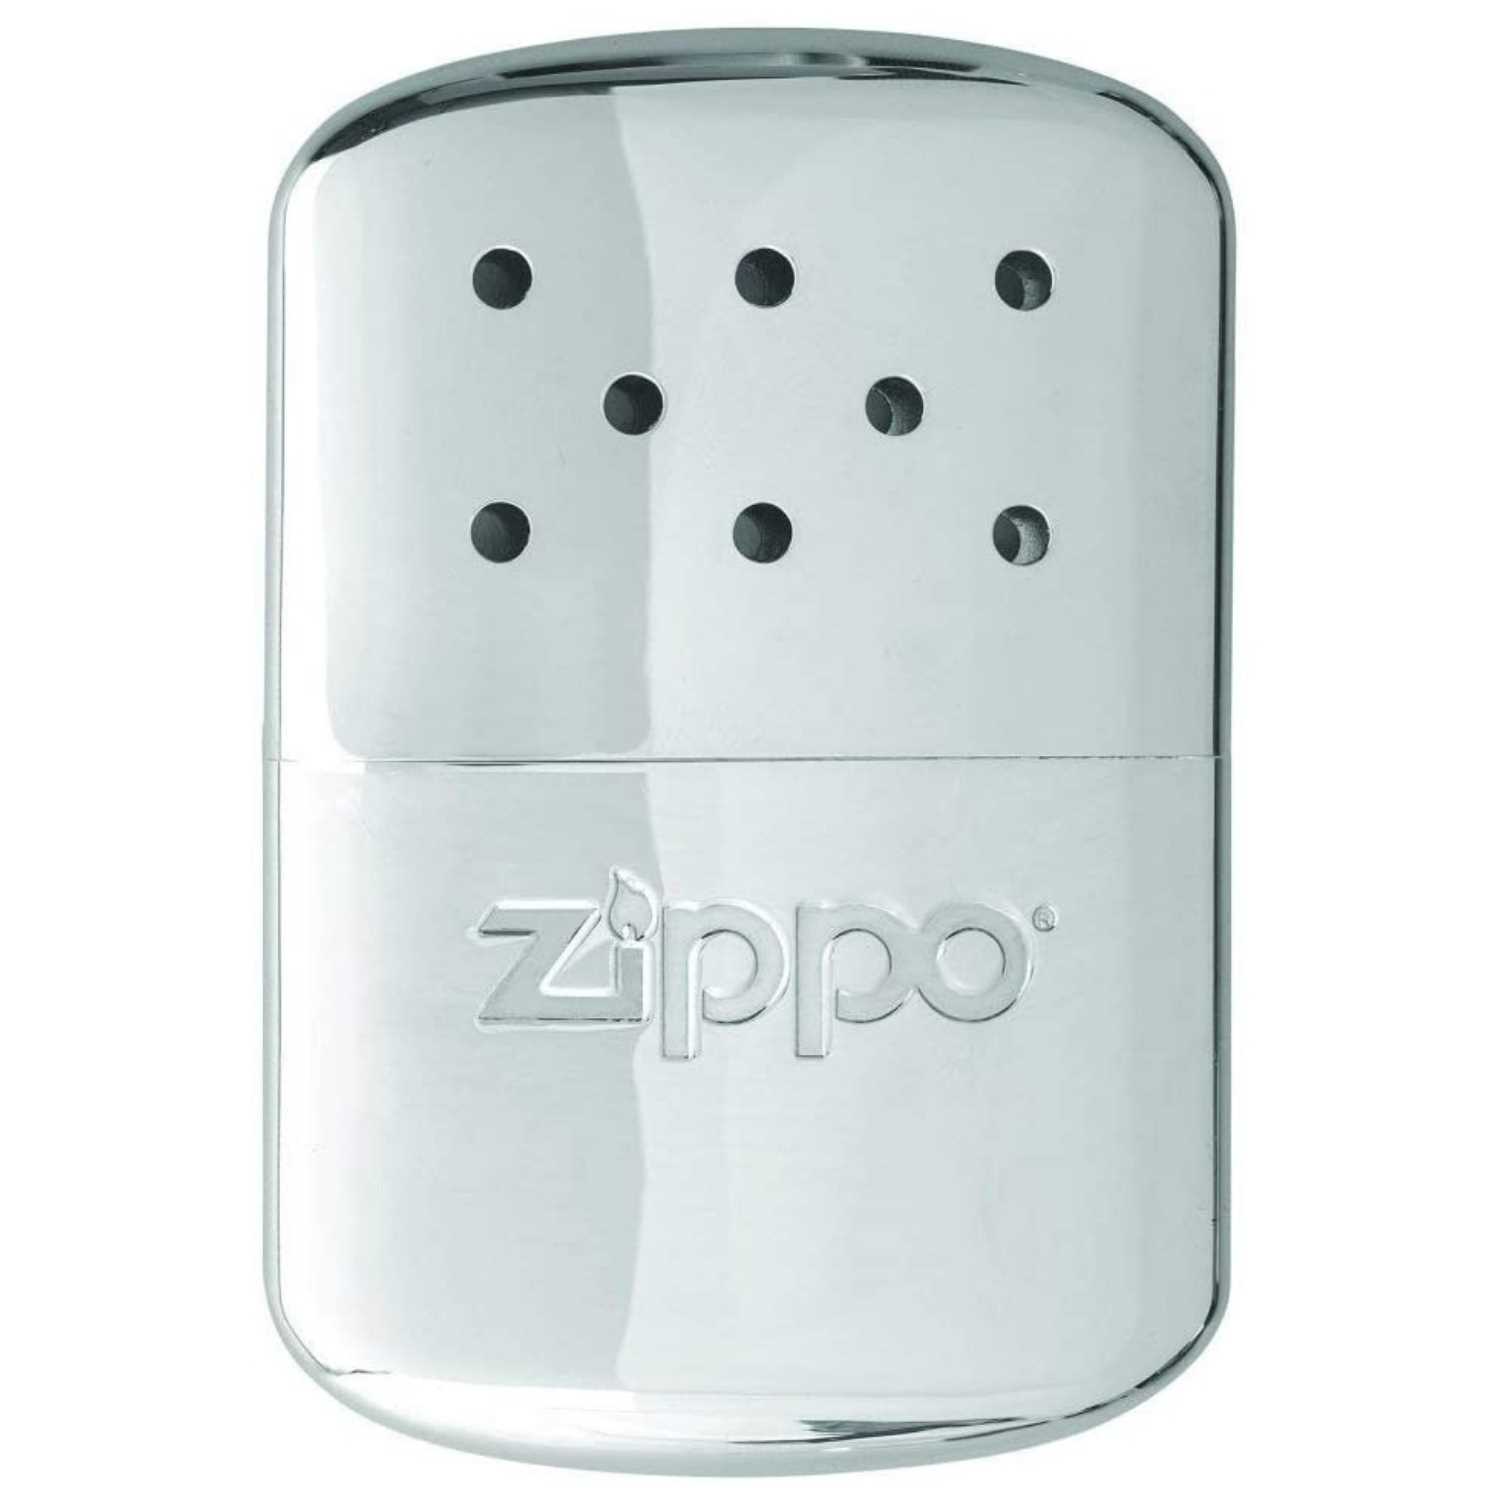 Zippo Flameless 12-Hour Refillable Hand Warmer Main Image - Best Christmas Gifts For Dad